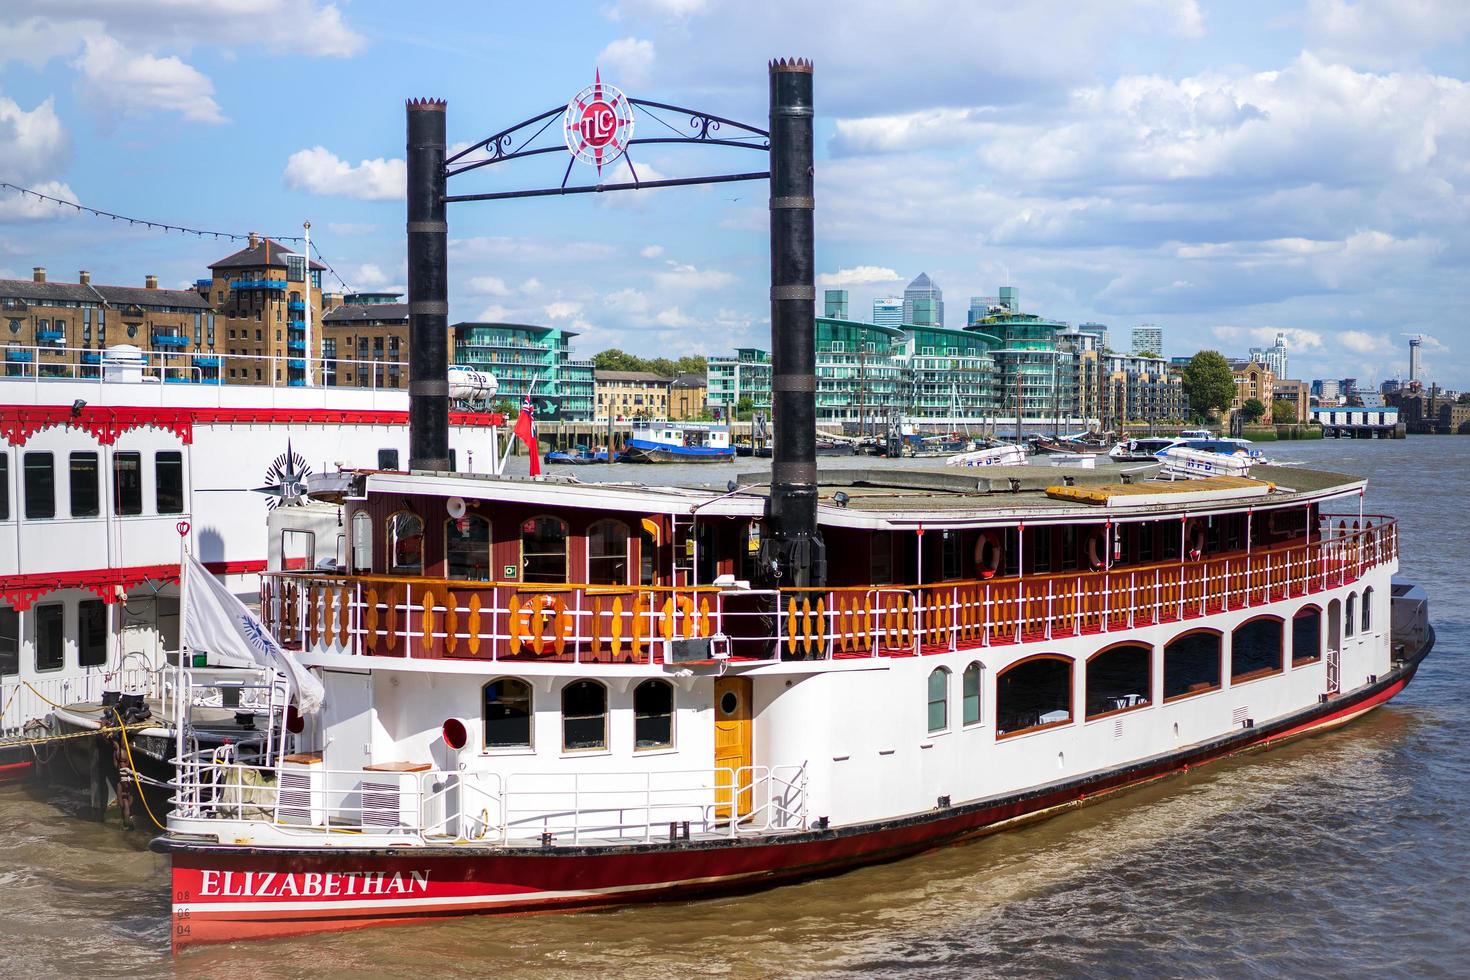 London, UK, 2014. The Elizabethan Moored on the River Thames photo